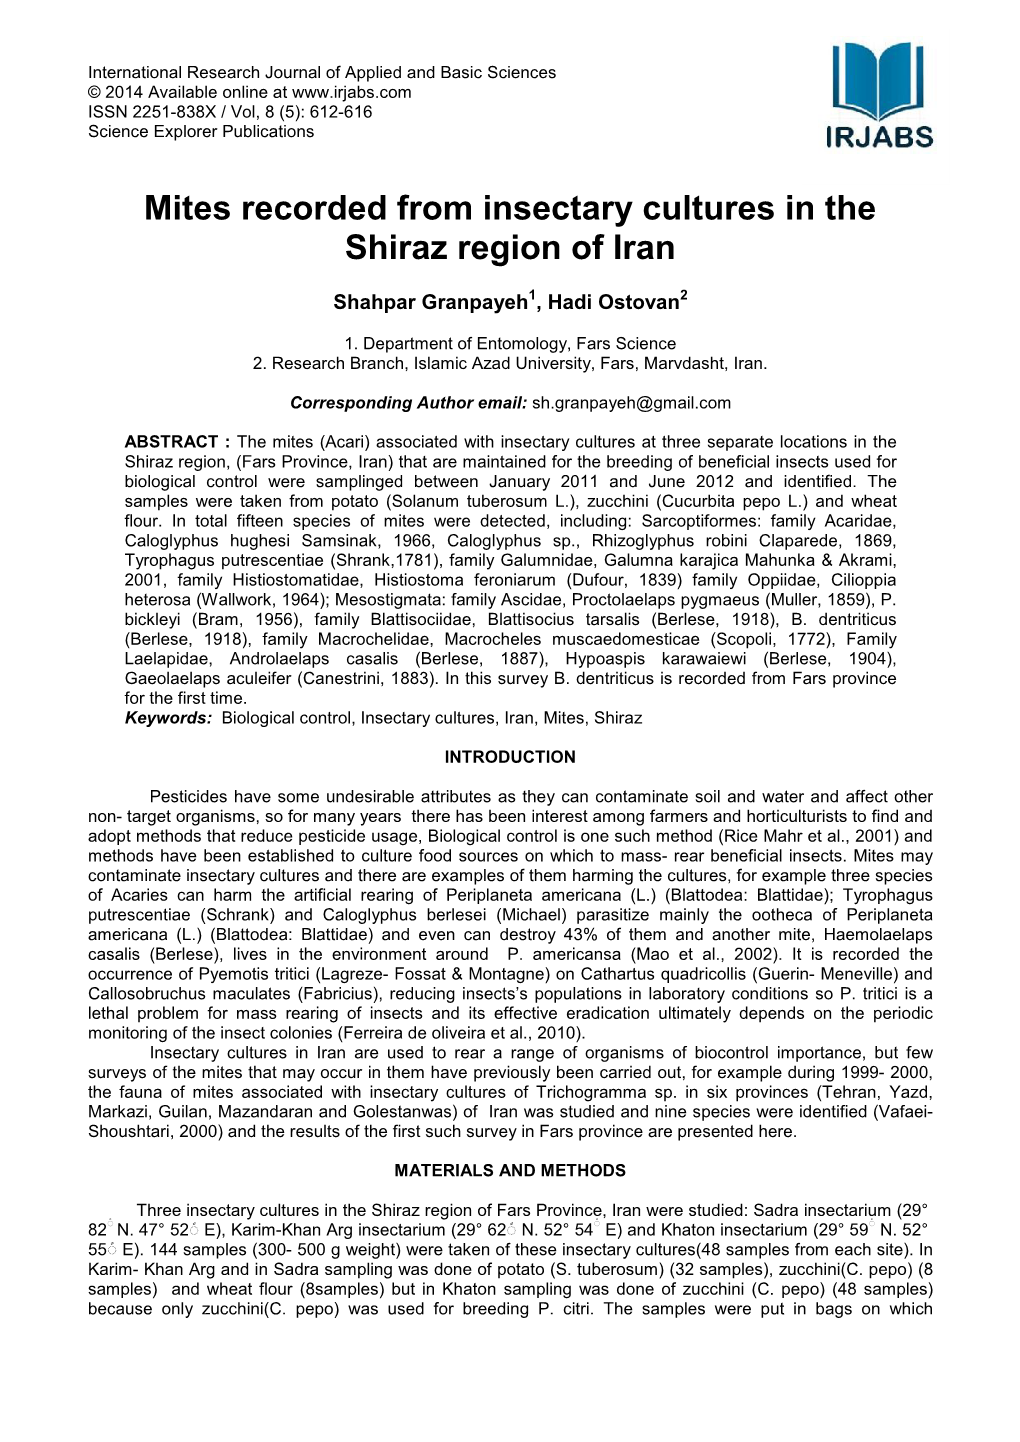 Mites Recorded from Insectary Cultures in the Shiraz Region of Iran